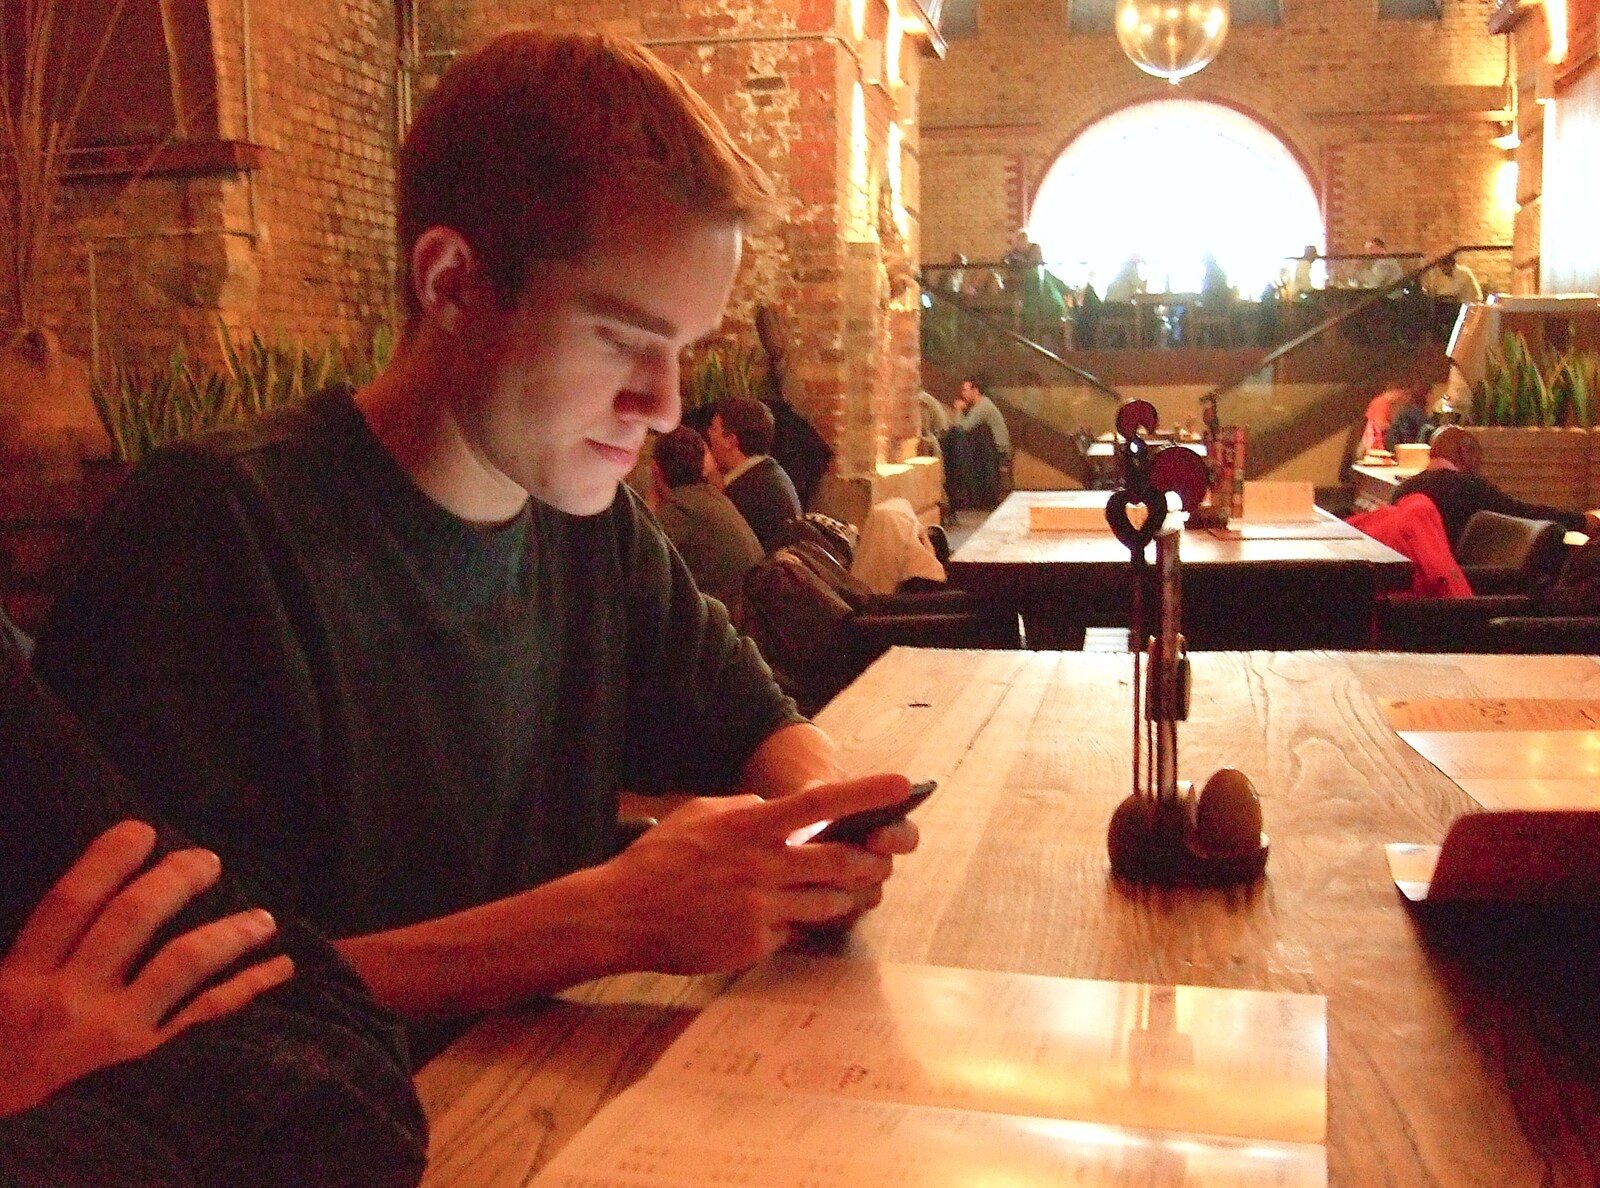 Jon's on the phone from TouchType does Nandos, Southwark Arches, London - 29th November 2011